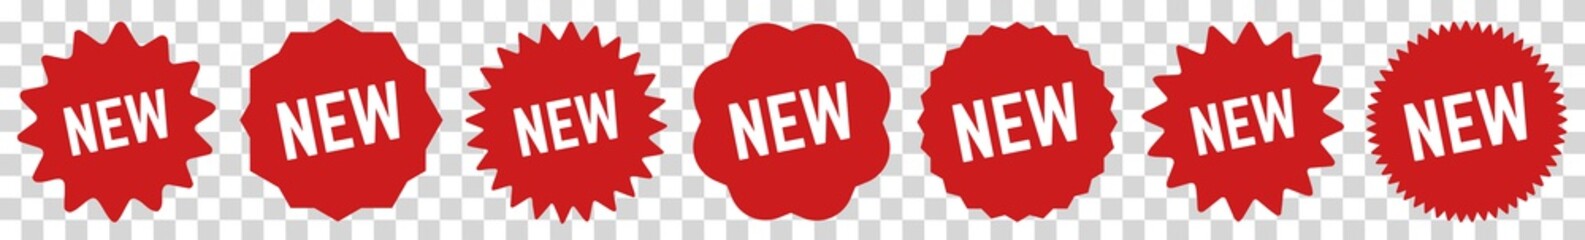 New Tag Red | Special Offer Icon | Sticker | Deal Label | Variations